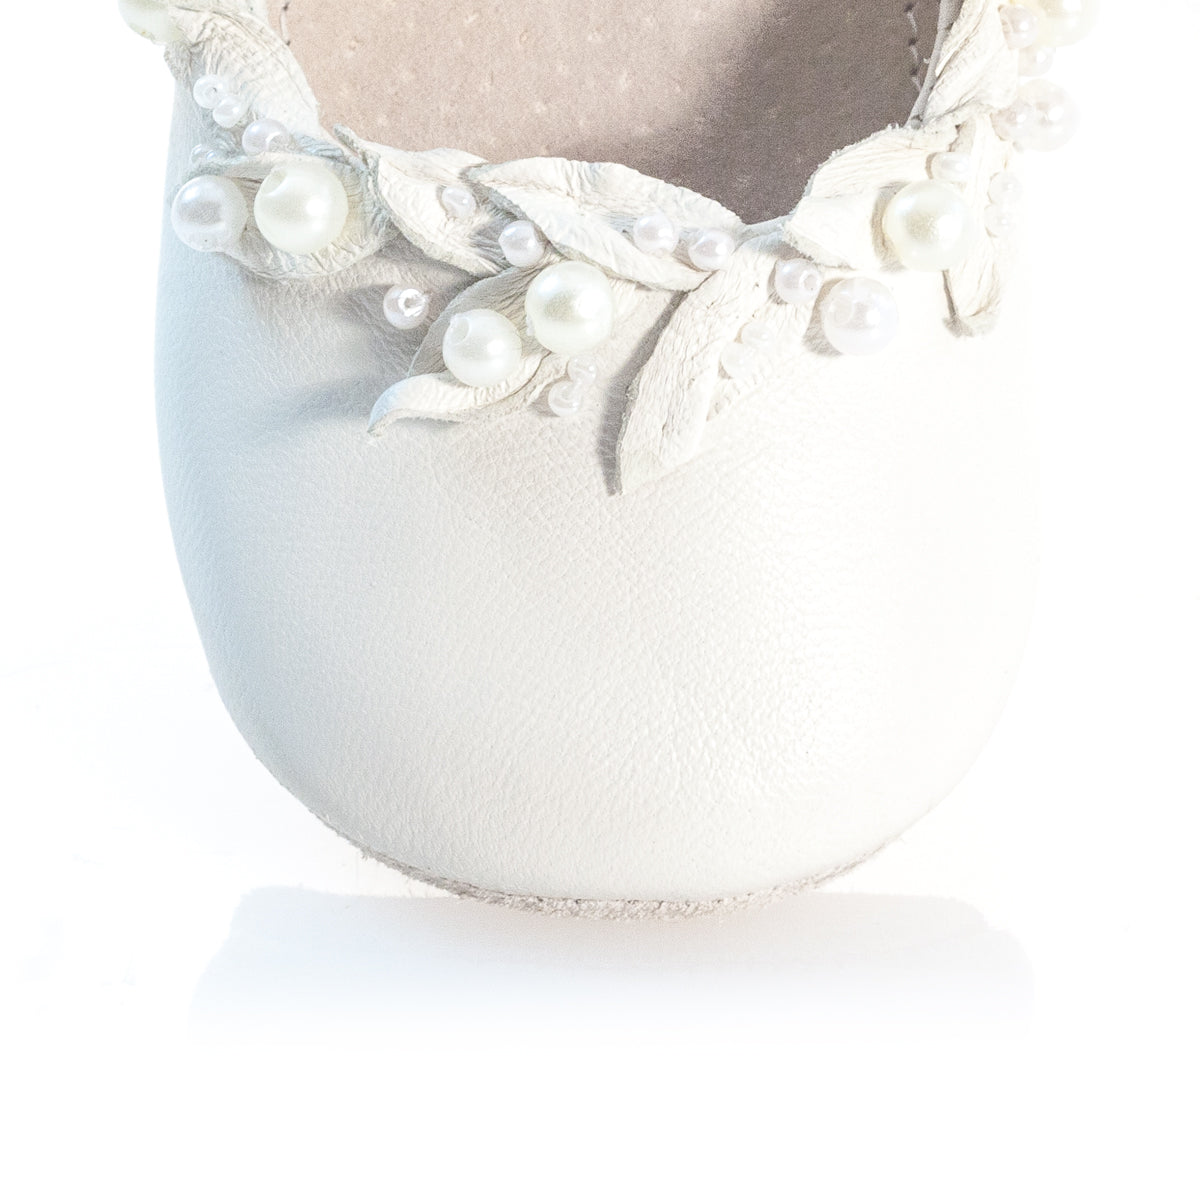 VIBYS WHITE FOREST handmade soft soled white leather baby shoes